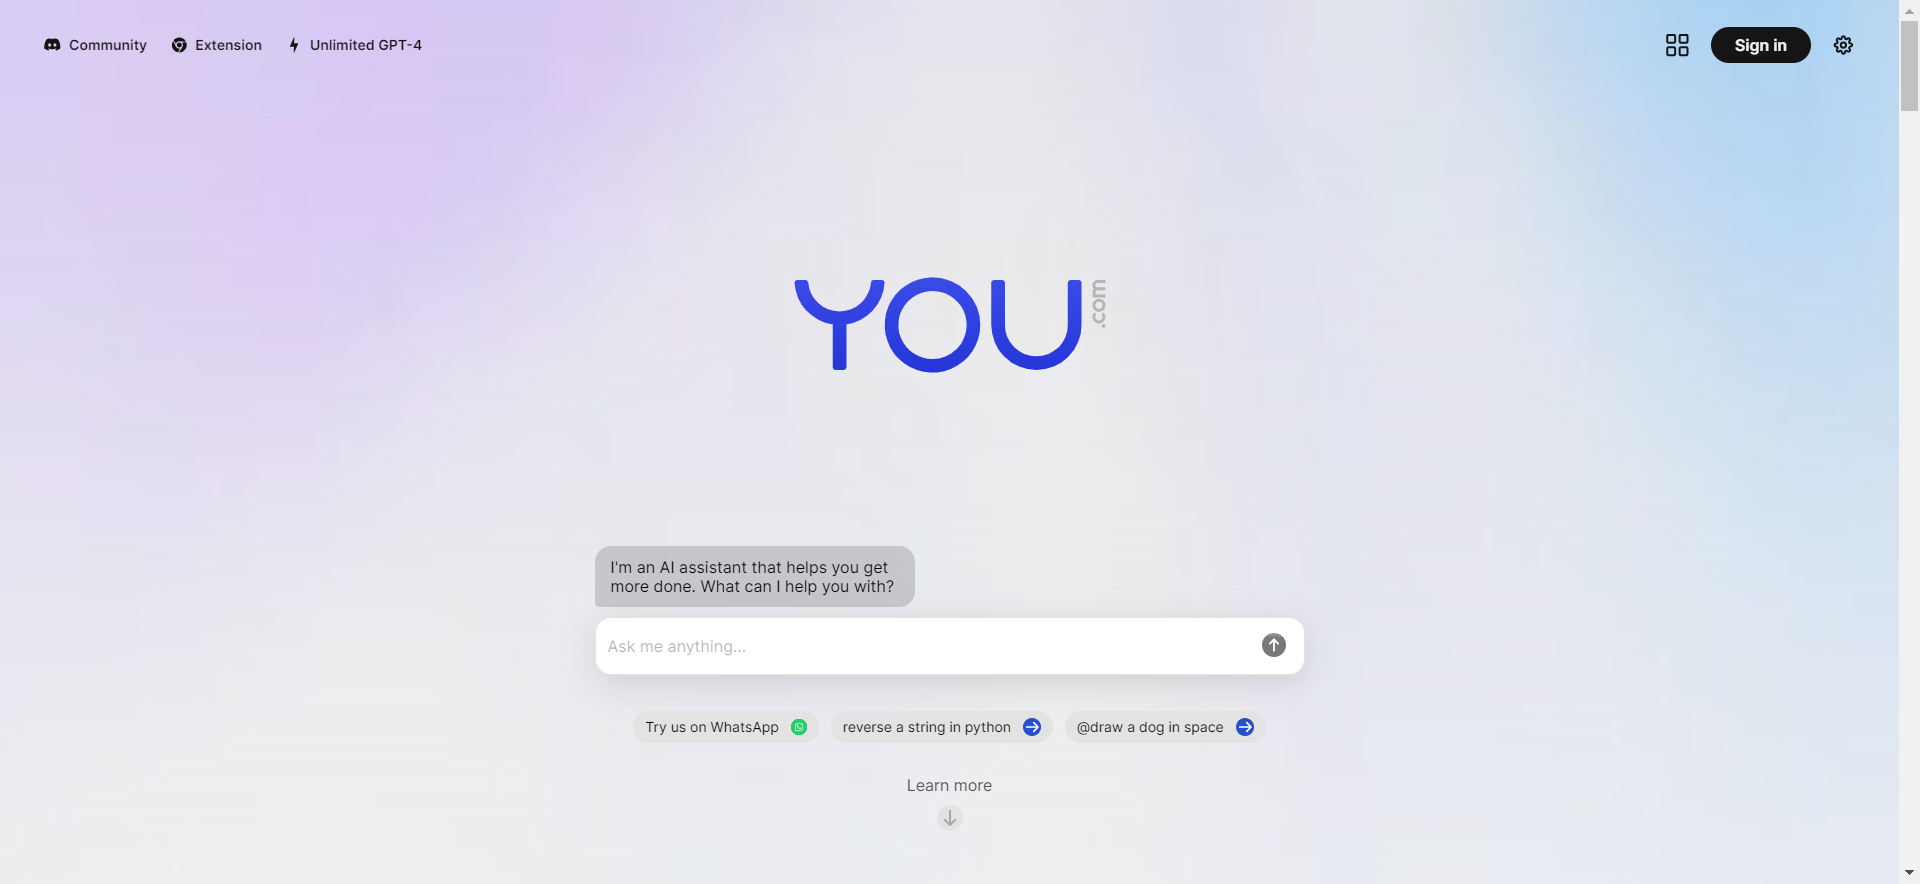 Search Engine 'You'